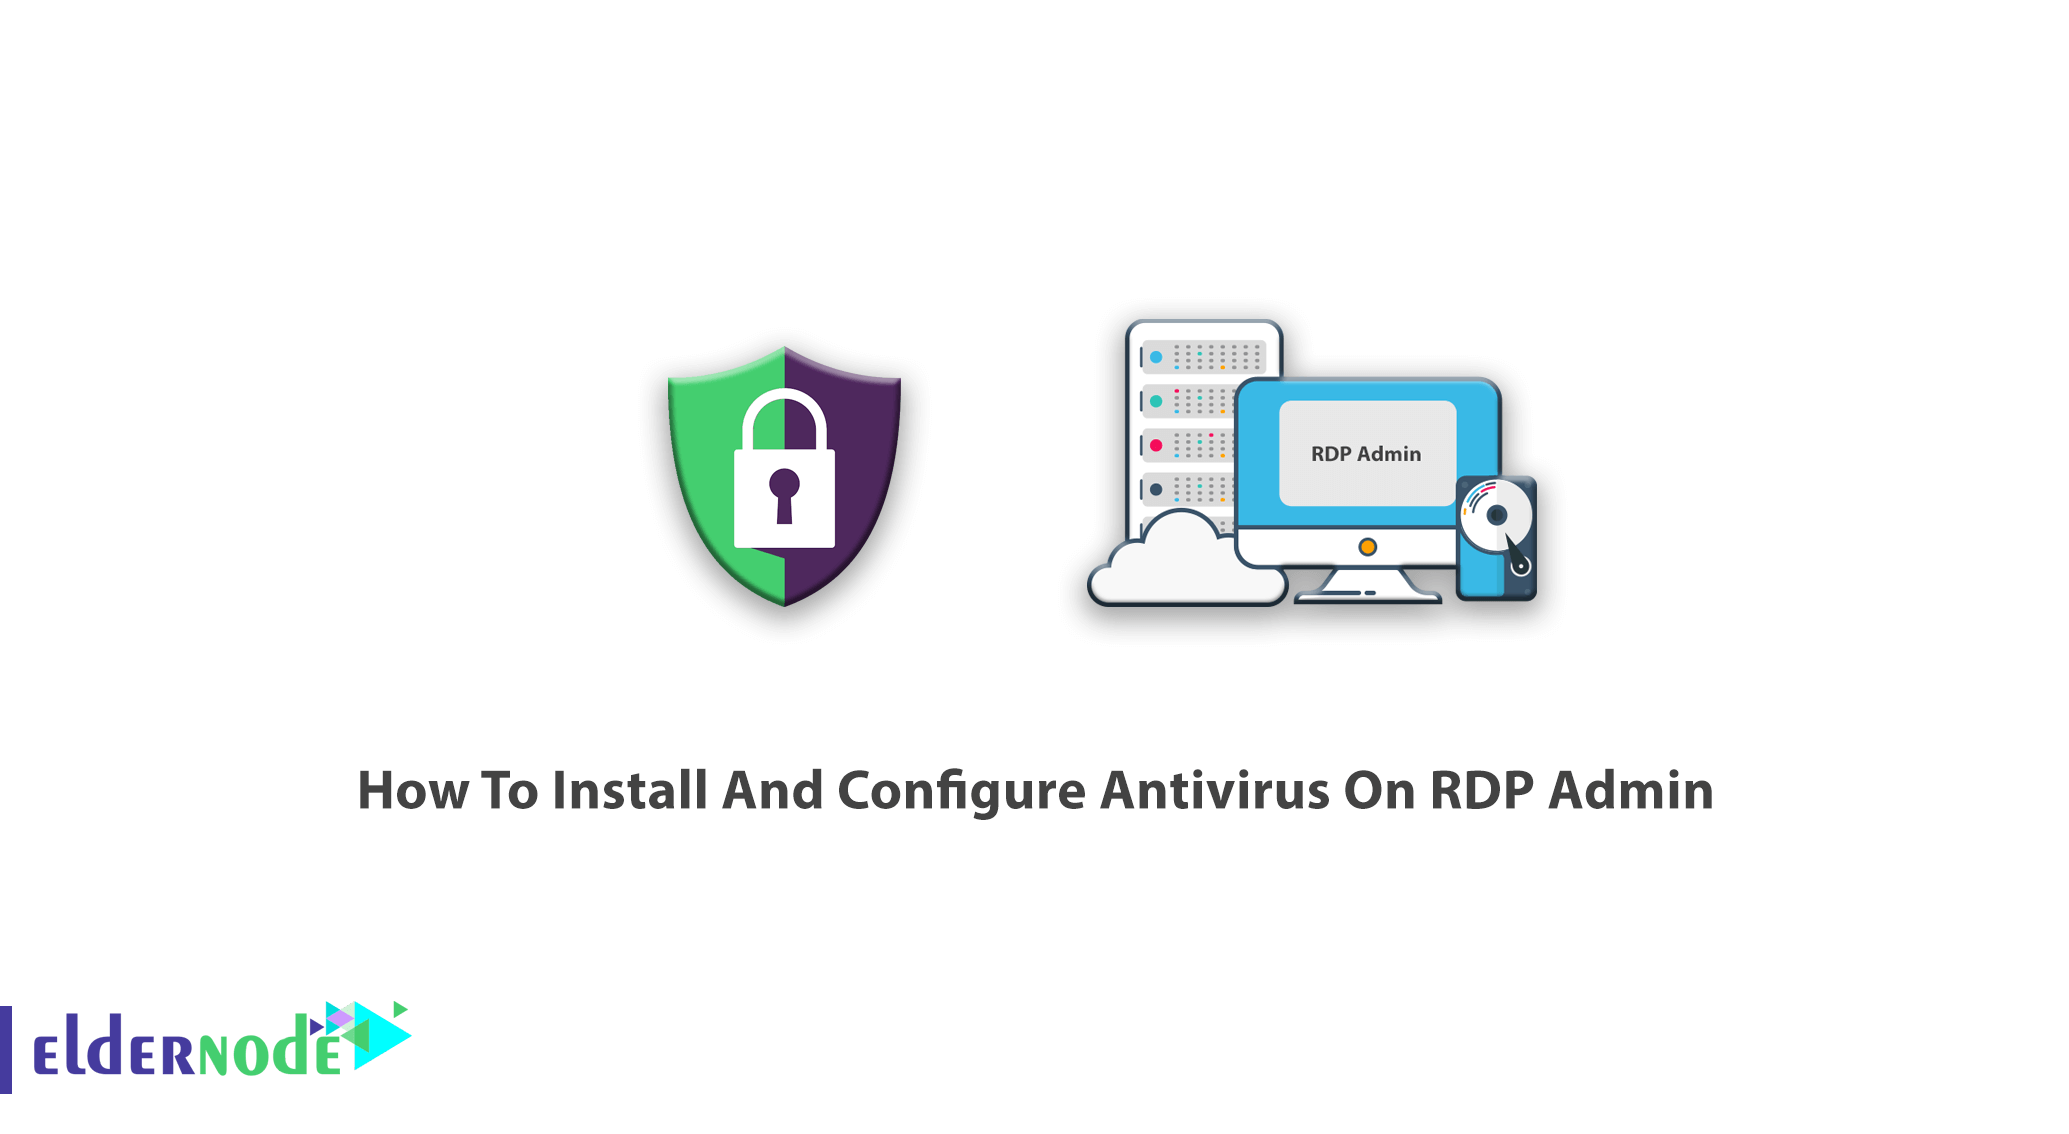 How To Install And Configure Antivirus On RDP Admin